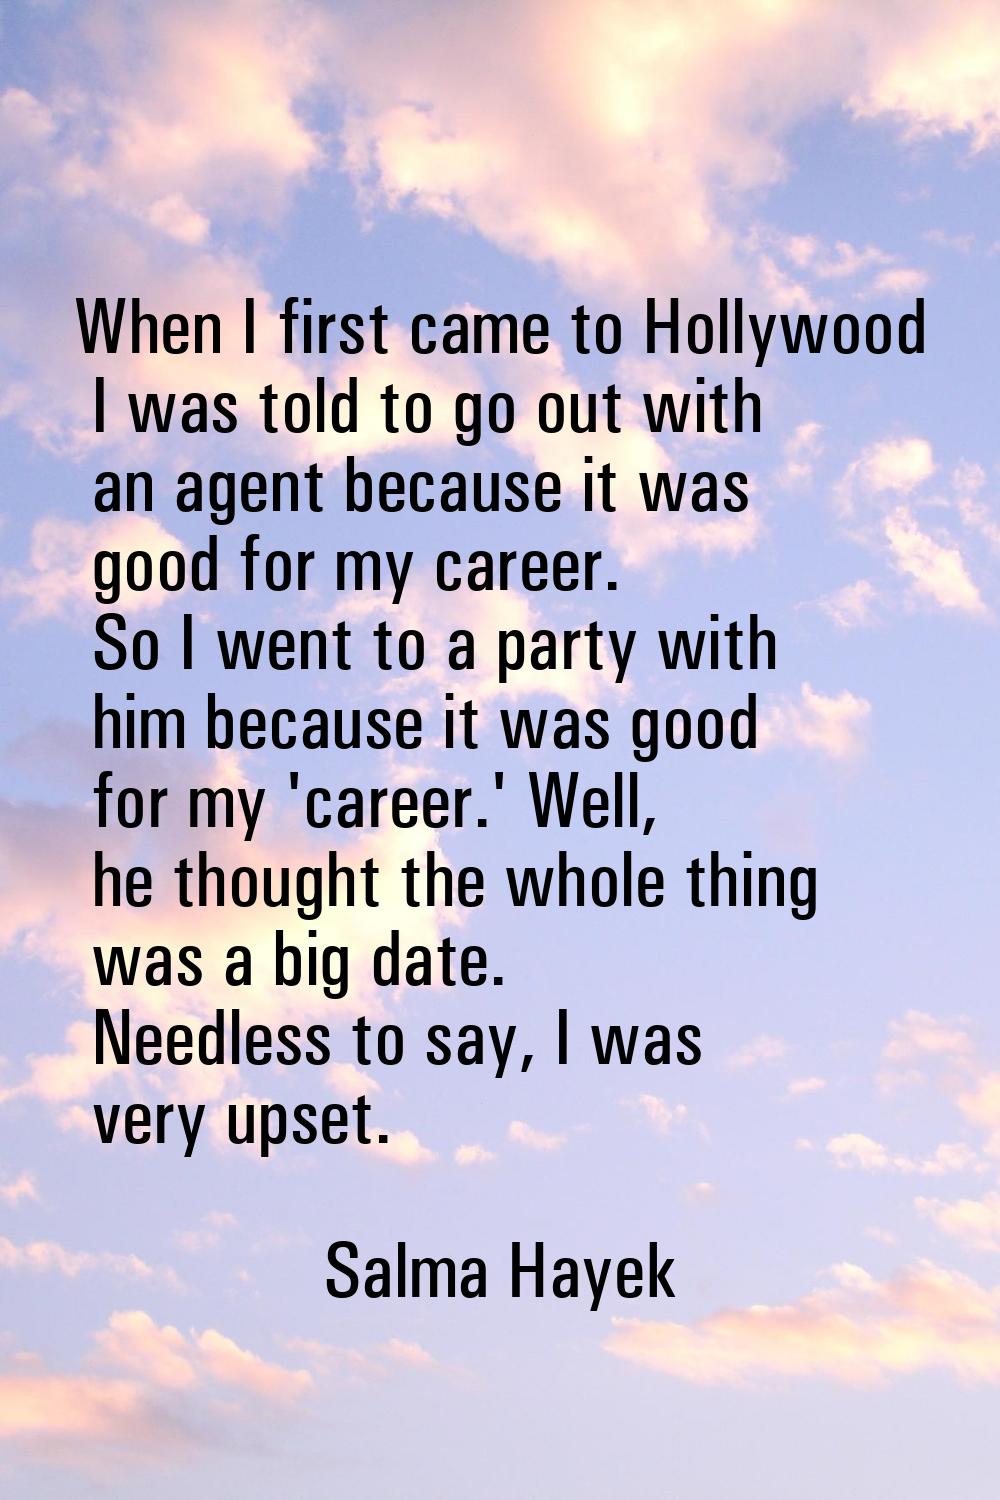 When I first came to Hollywood I was told to go out with an agent because it was good for my career